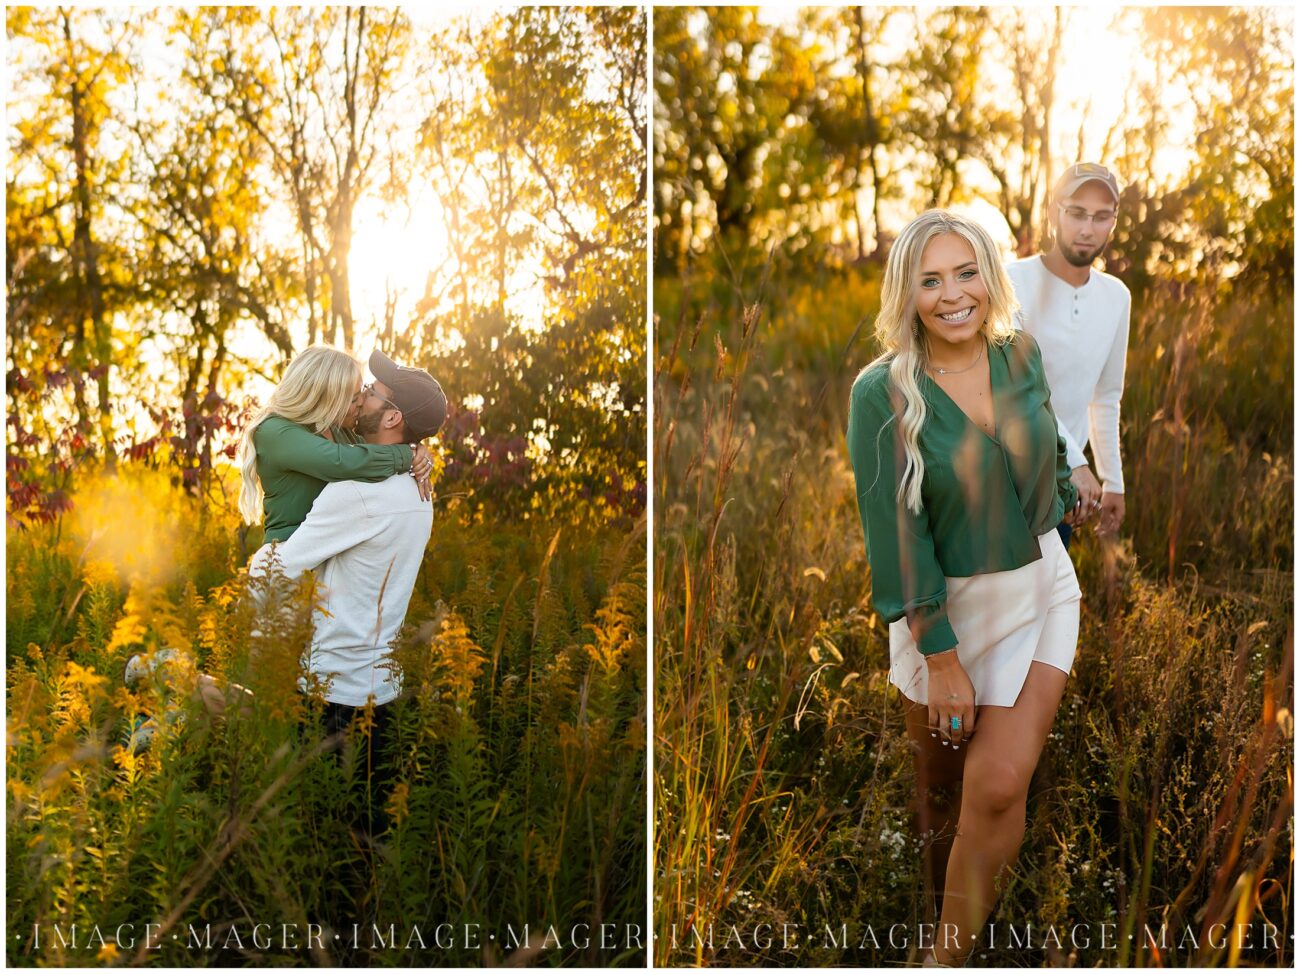 glowing engagement session at sunset large ring